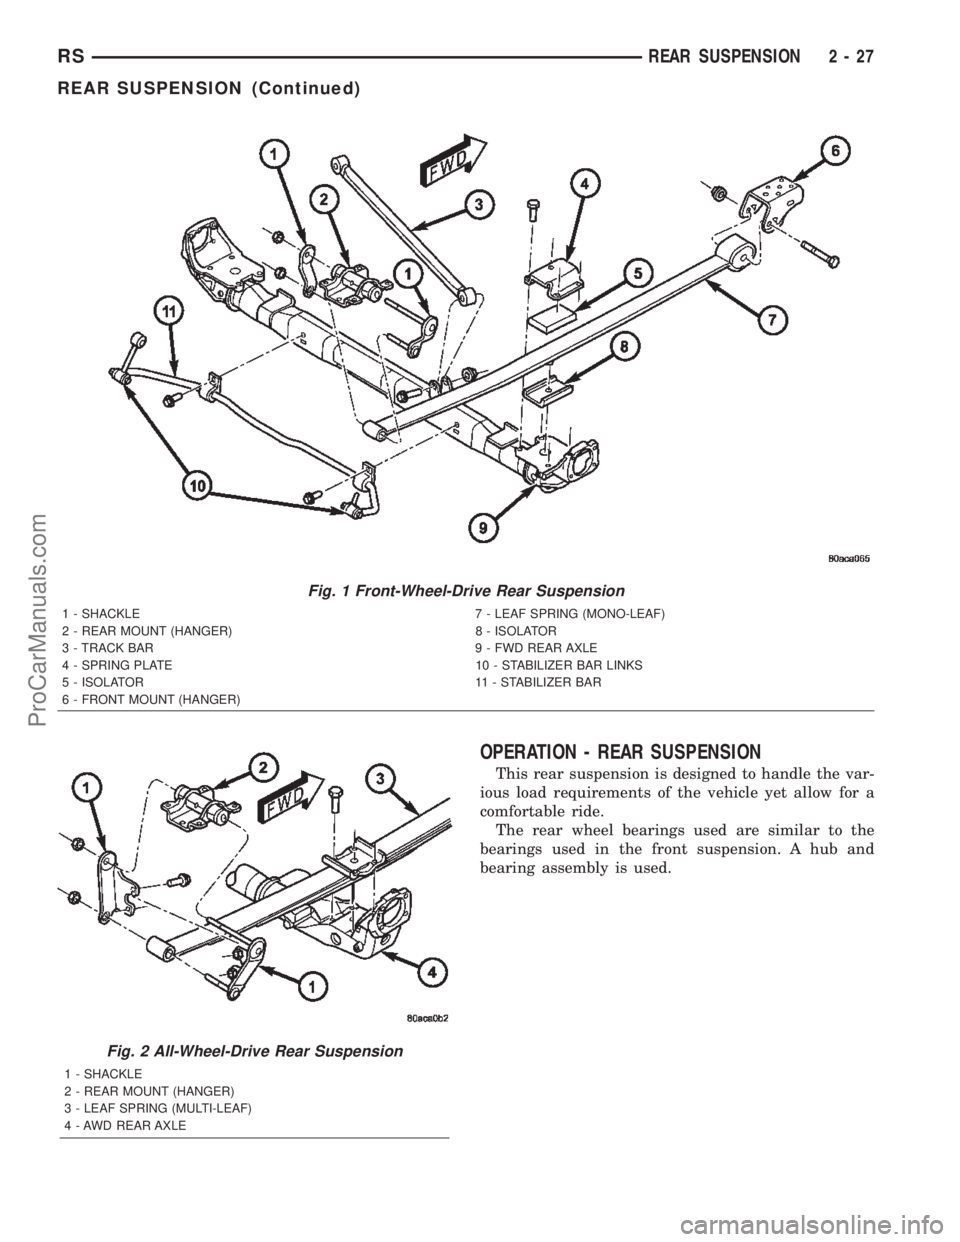 DODGE TOWN AND COUNTRY 2002 Workshop Manual OPERATION - REAR SUSPENSION
This rear suspension is designed to handle the var-
ious load requirements of the vehicle yet allow for a
comfortable ride.
The rear wheel bearings used are similar to the
